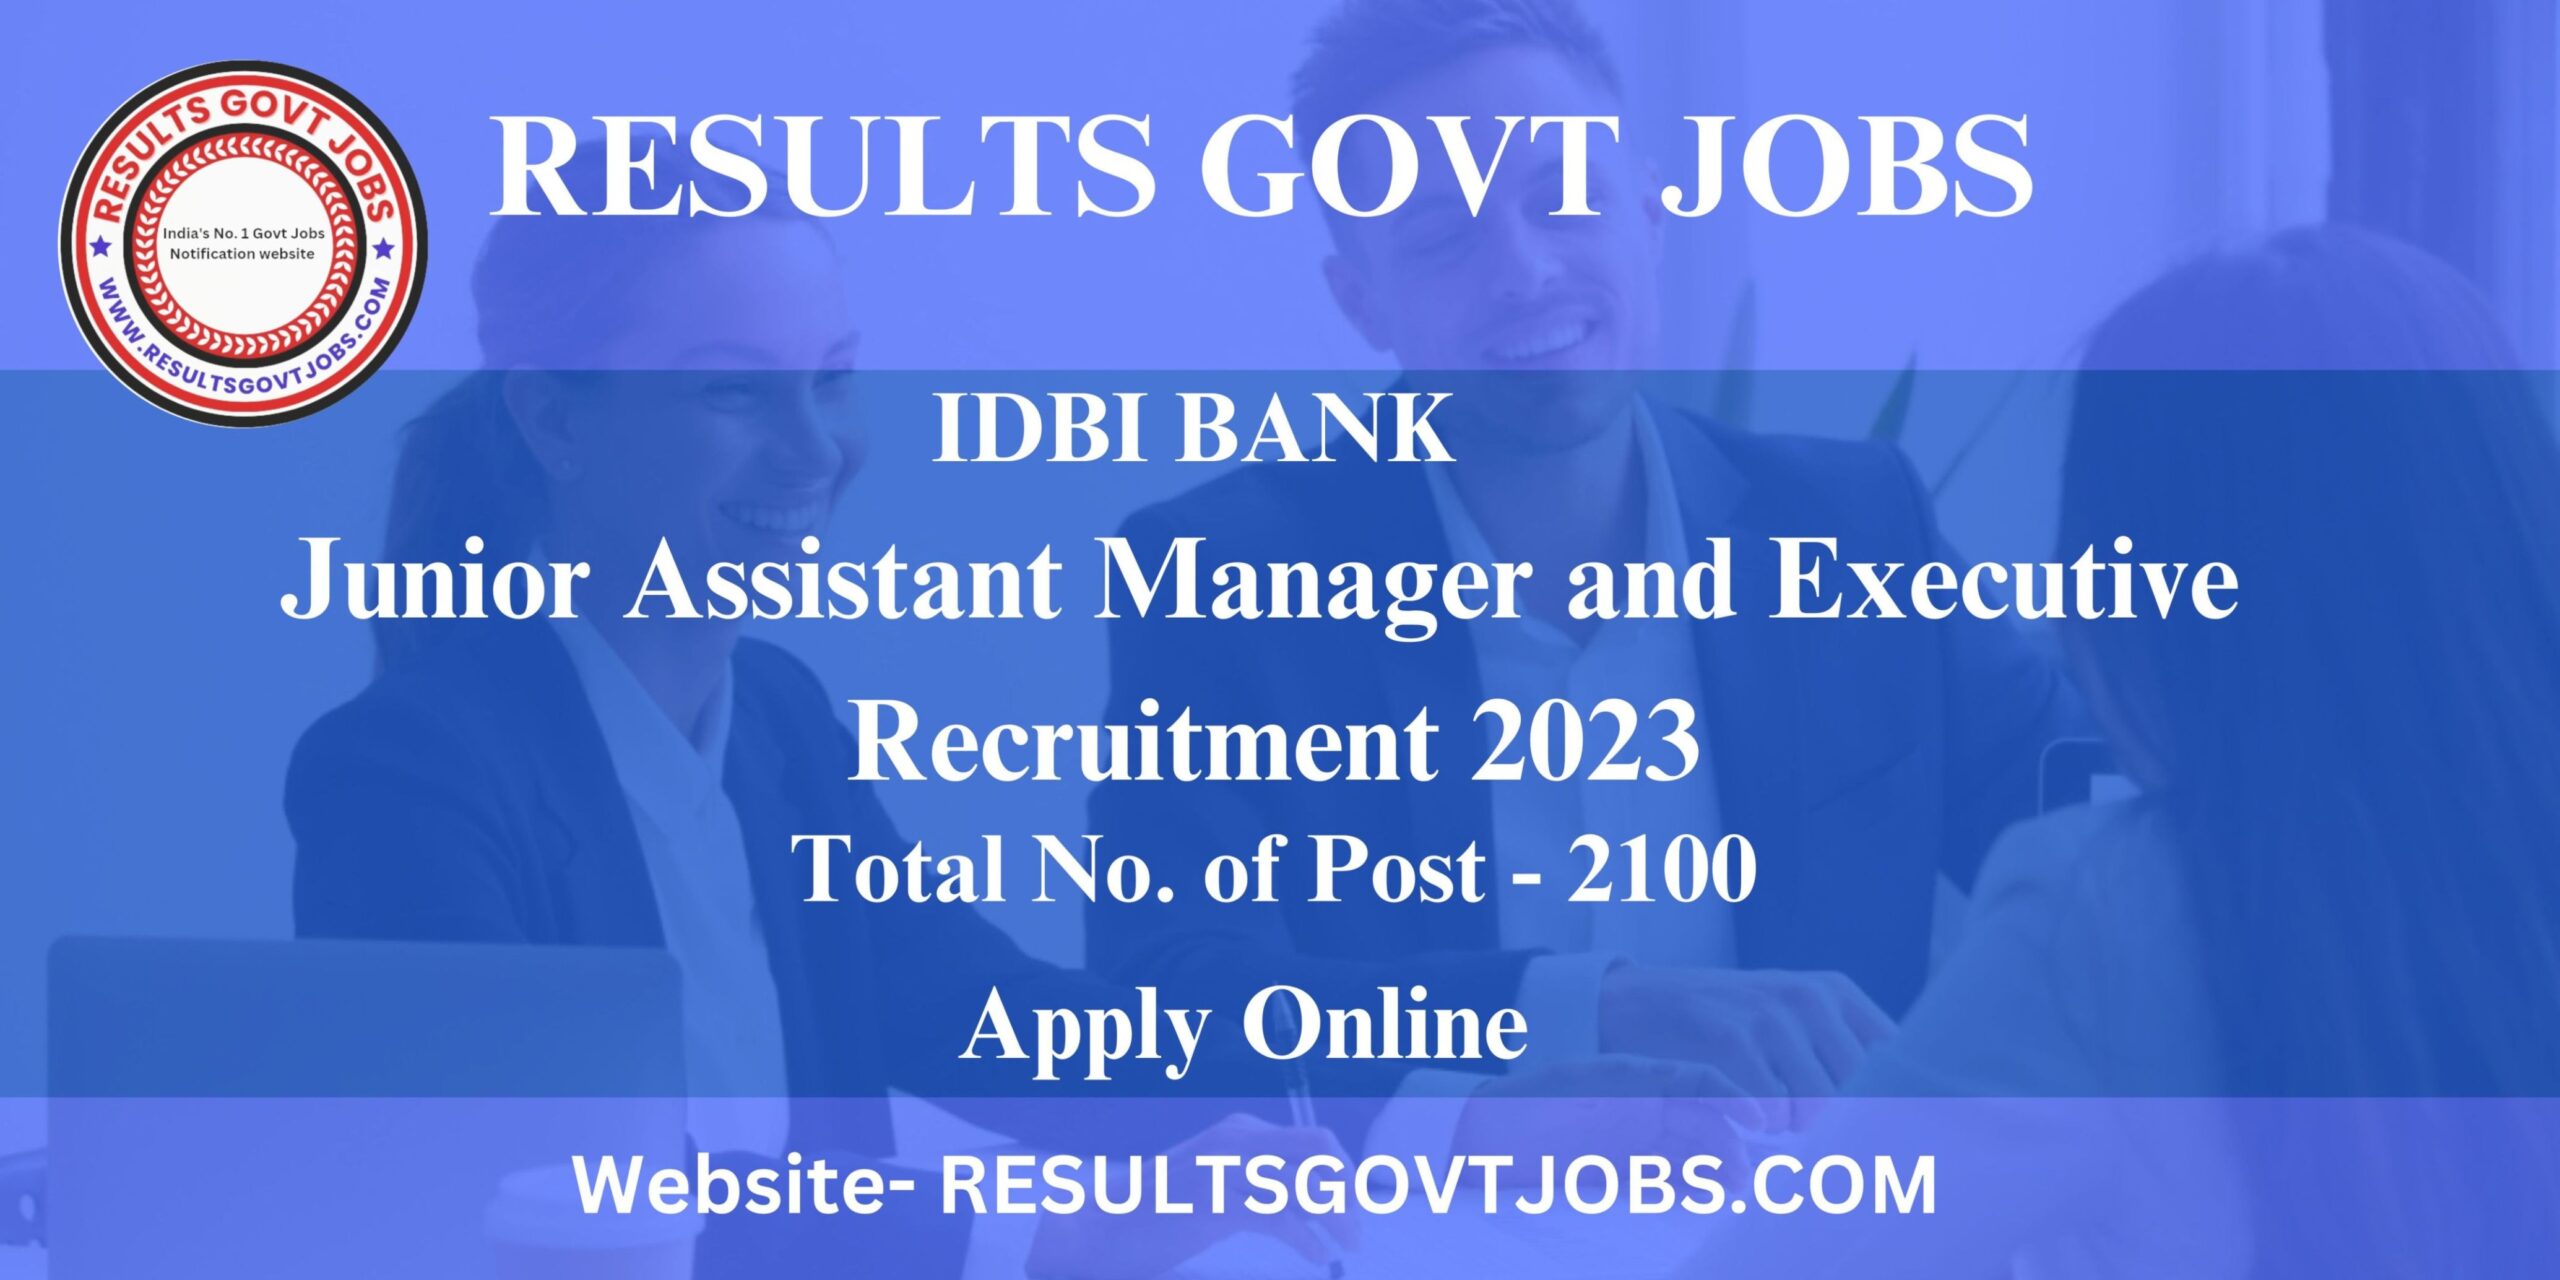 IDBI Bank Junior Assistant Manager and Executive Recruitment 2023 for 2100 posts 